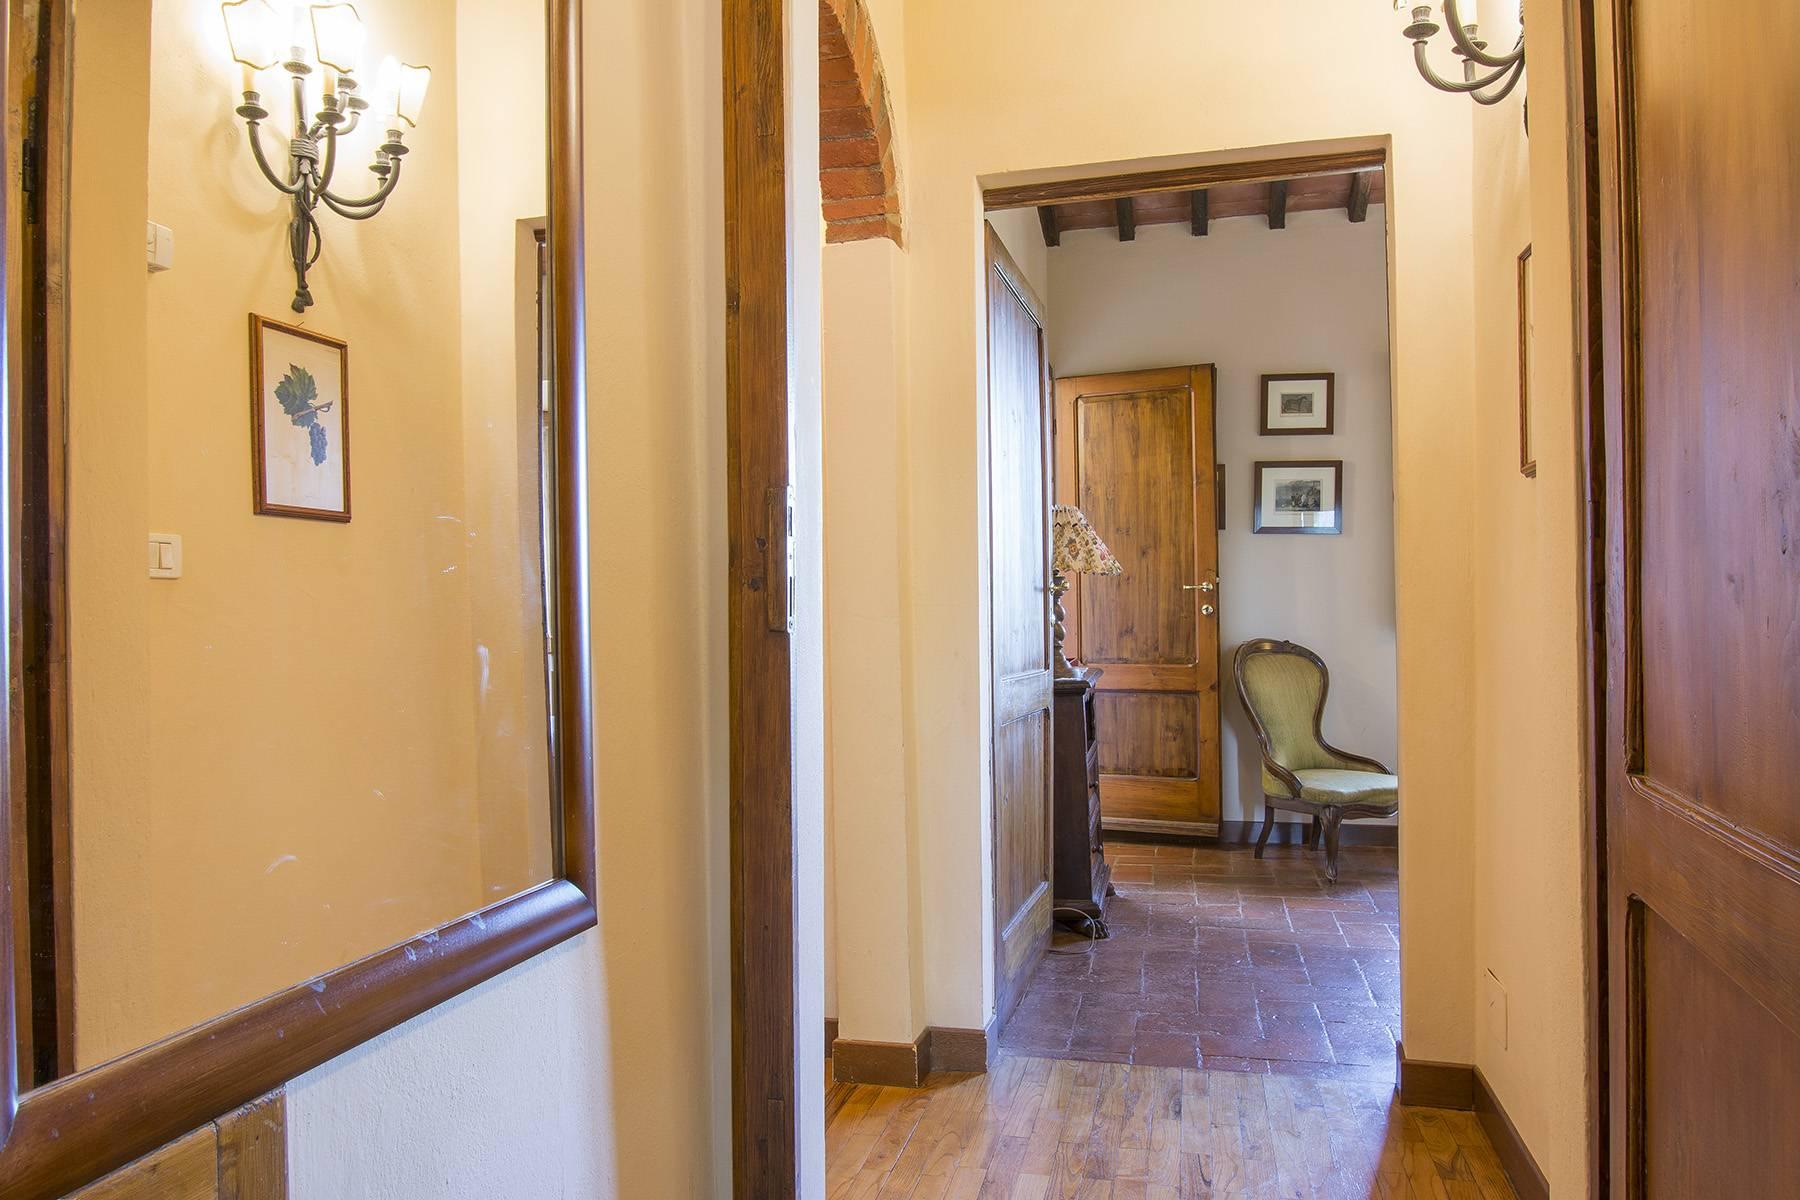 House in the Tuscan Hills for Sale - 16